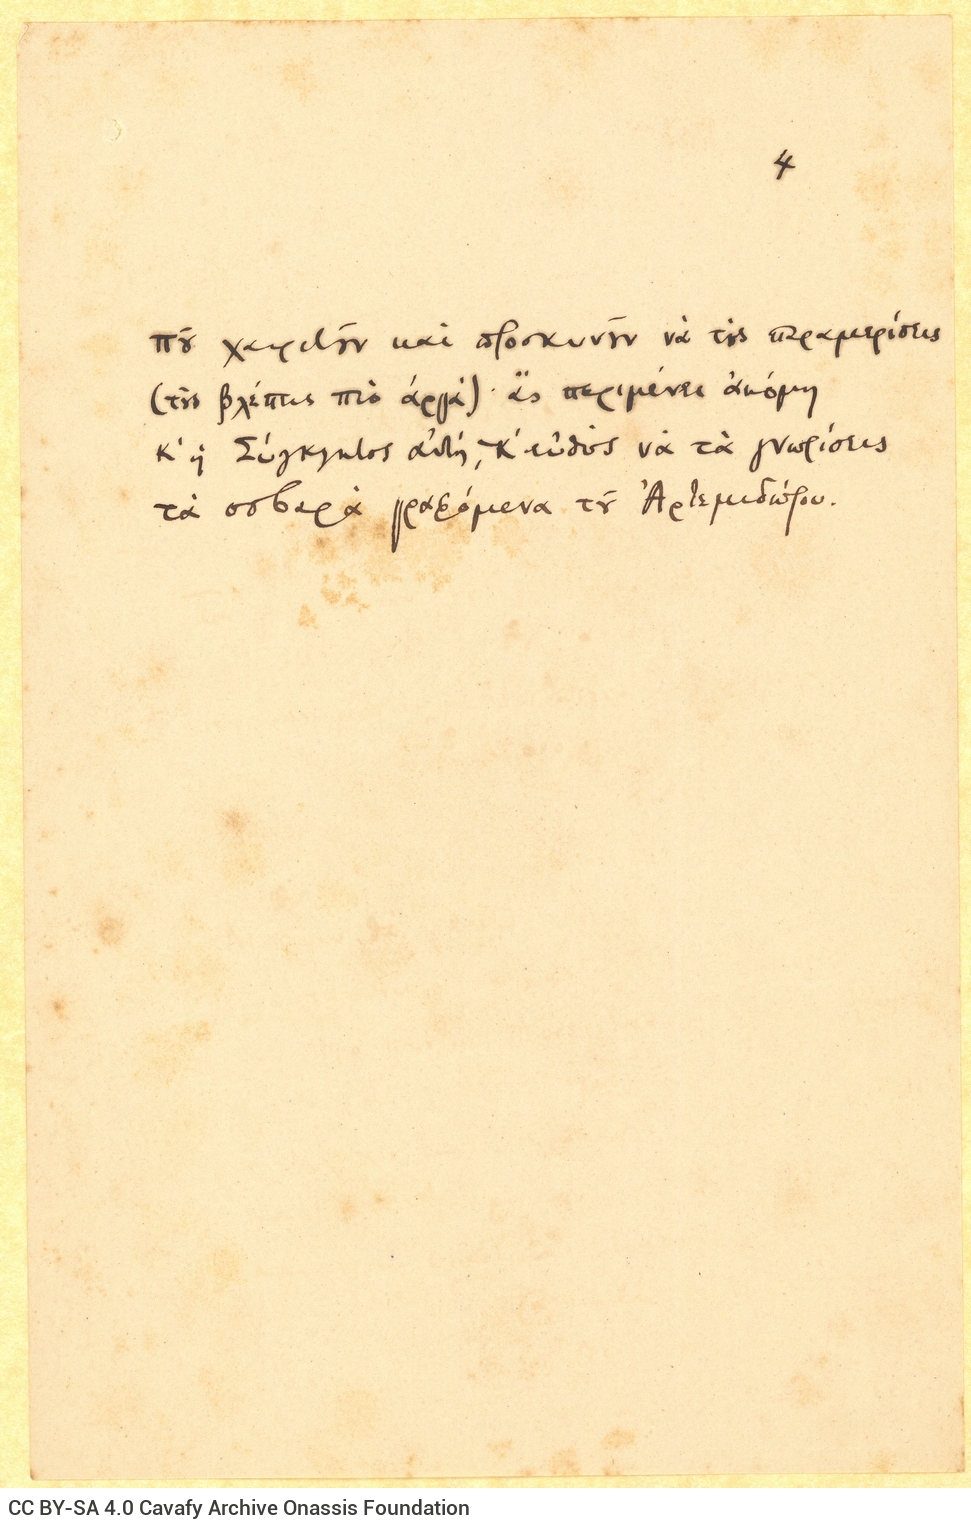 Manuscript of the poem "Ides of March" on one side of two sheets of paper. Numbers "3" and "4" indicated at top right.